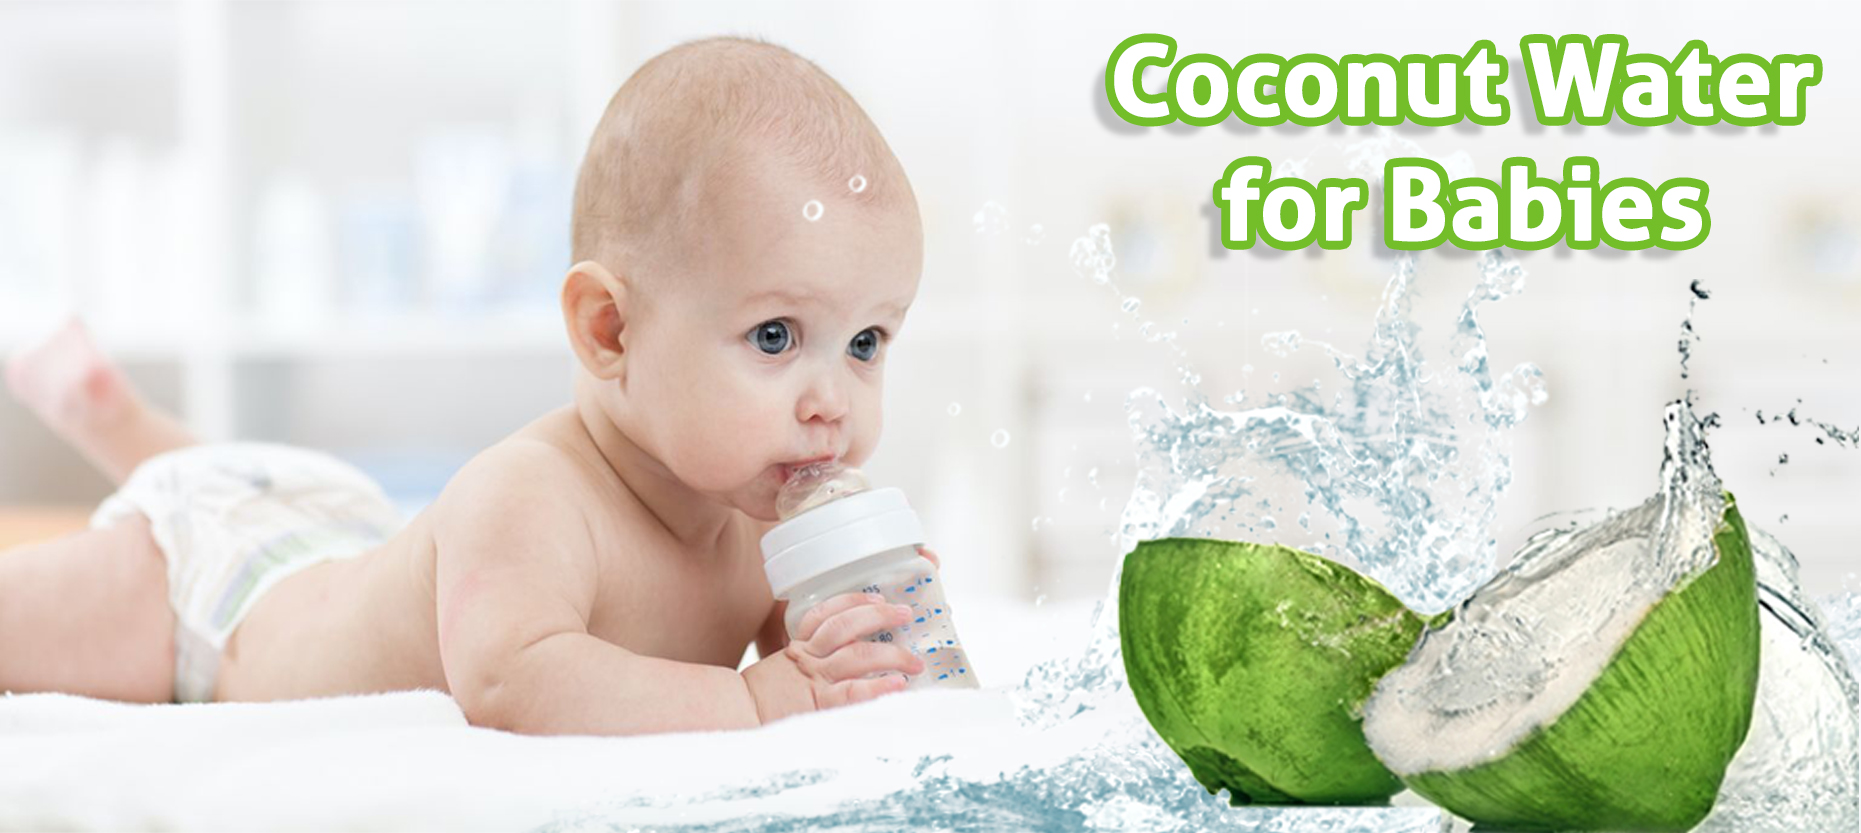 Coconut Water for Babies